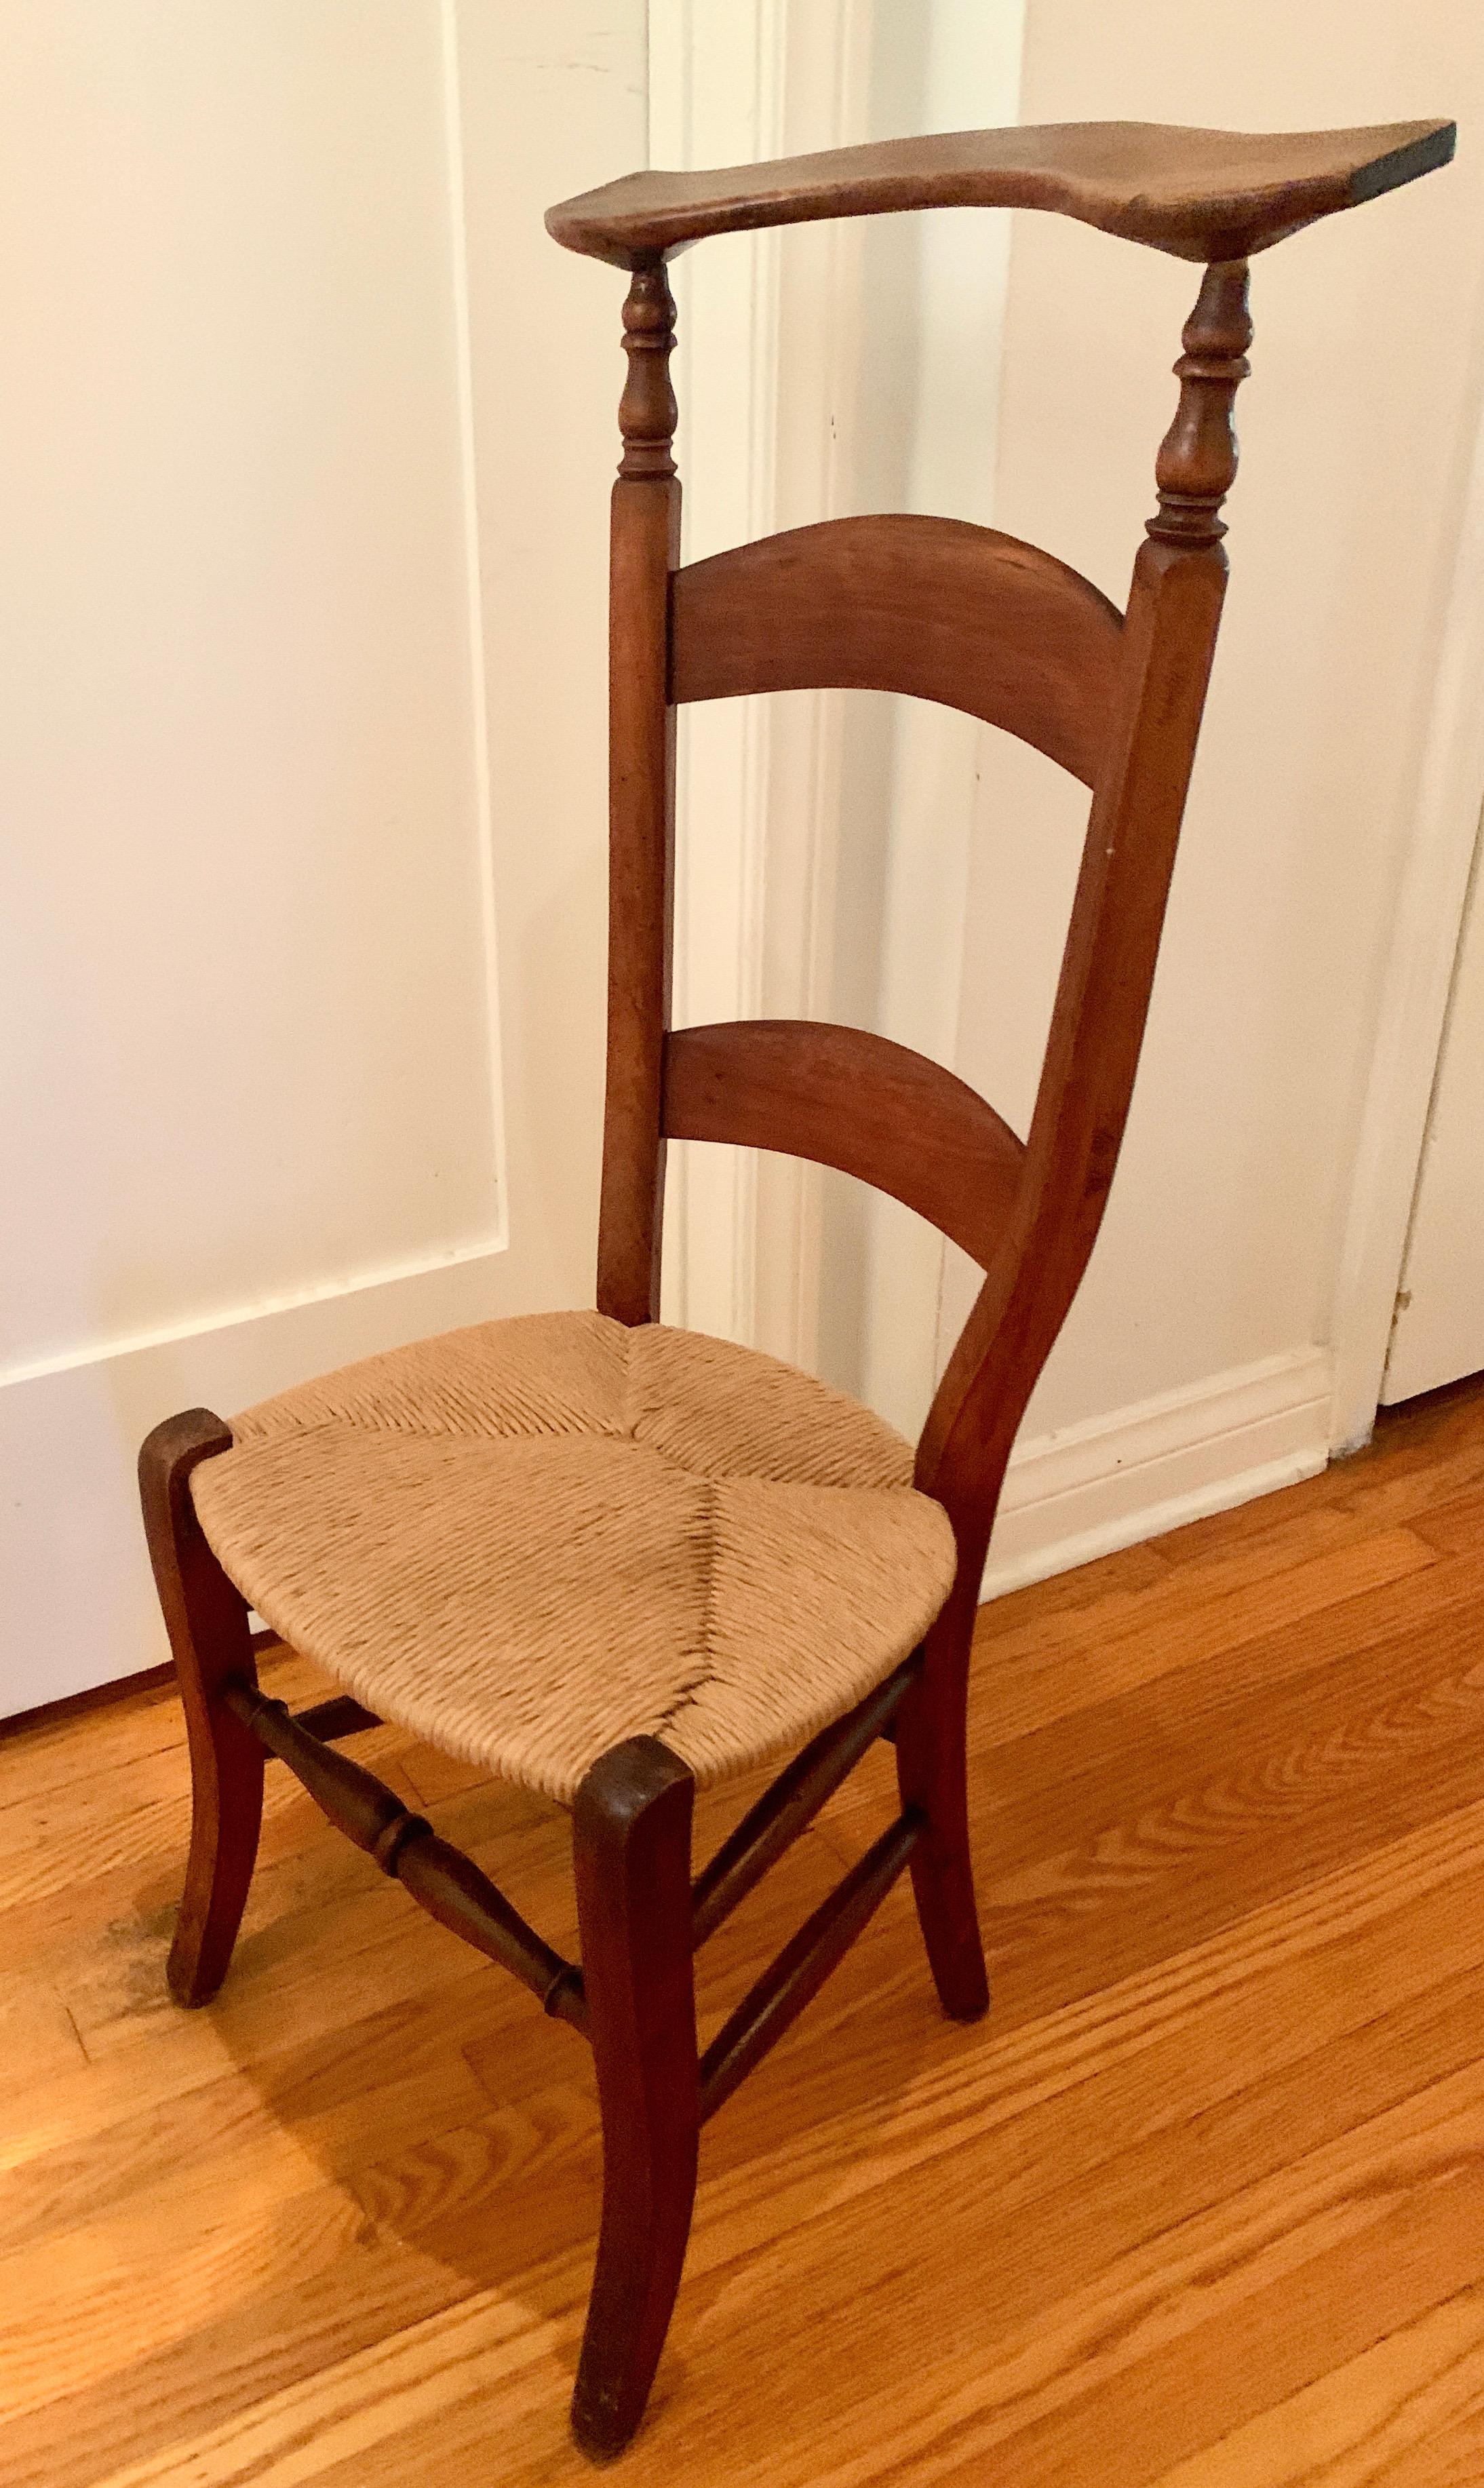 Wooden Prie Dieu Chair. A handsome piece with an origin as a prayer chair, however, in modern homes is a compliment to many spaces in the home. Useful in the dressing area or closet as a valet, or in an entry or mud room to set and put on or take